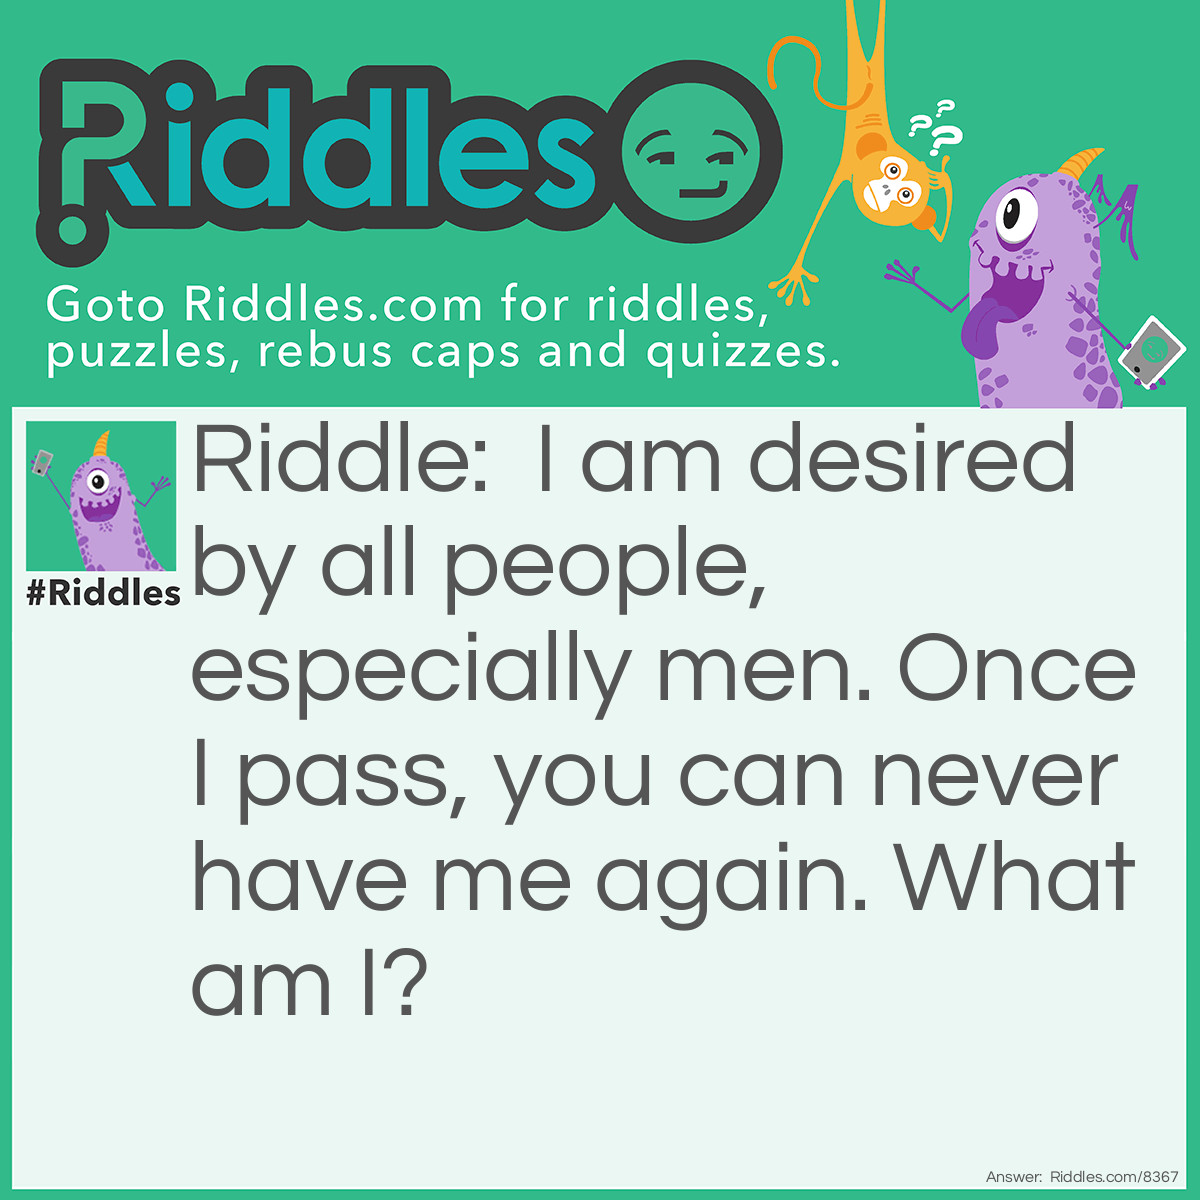 Riddle: I am desired by all people, especially men. Once I pass, you can never have me again. What am I? Answer: Youth.